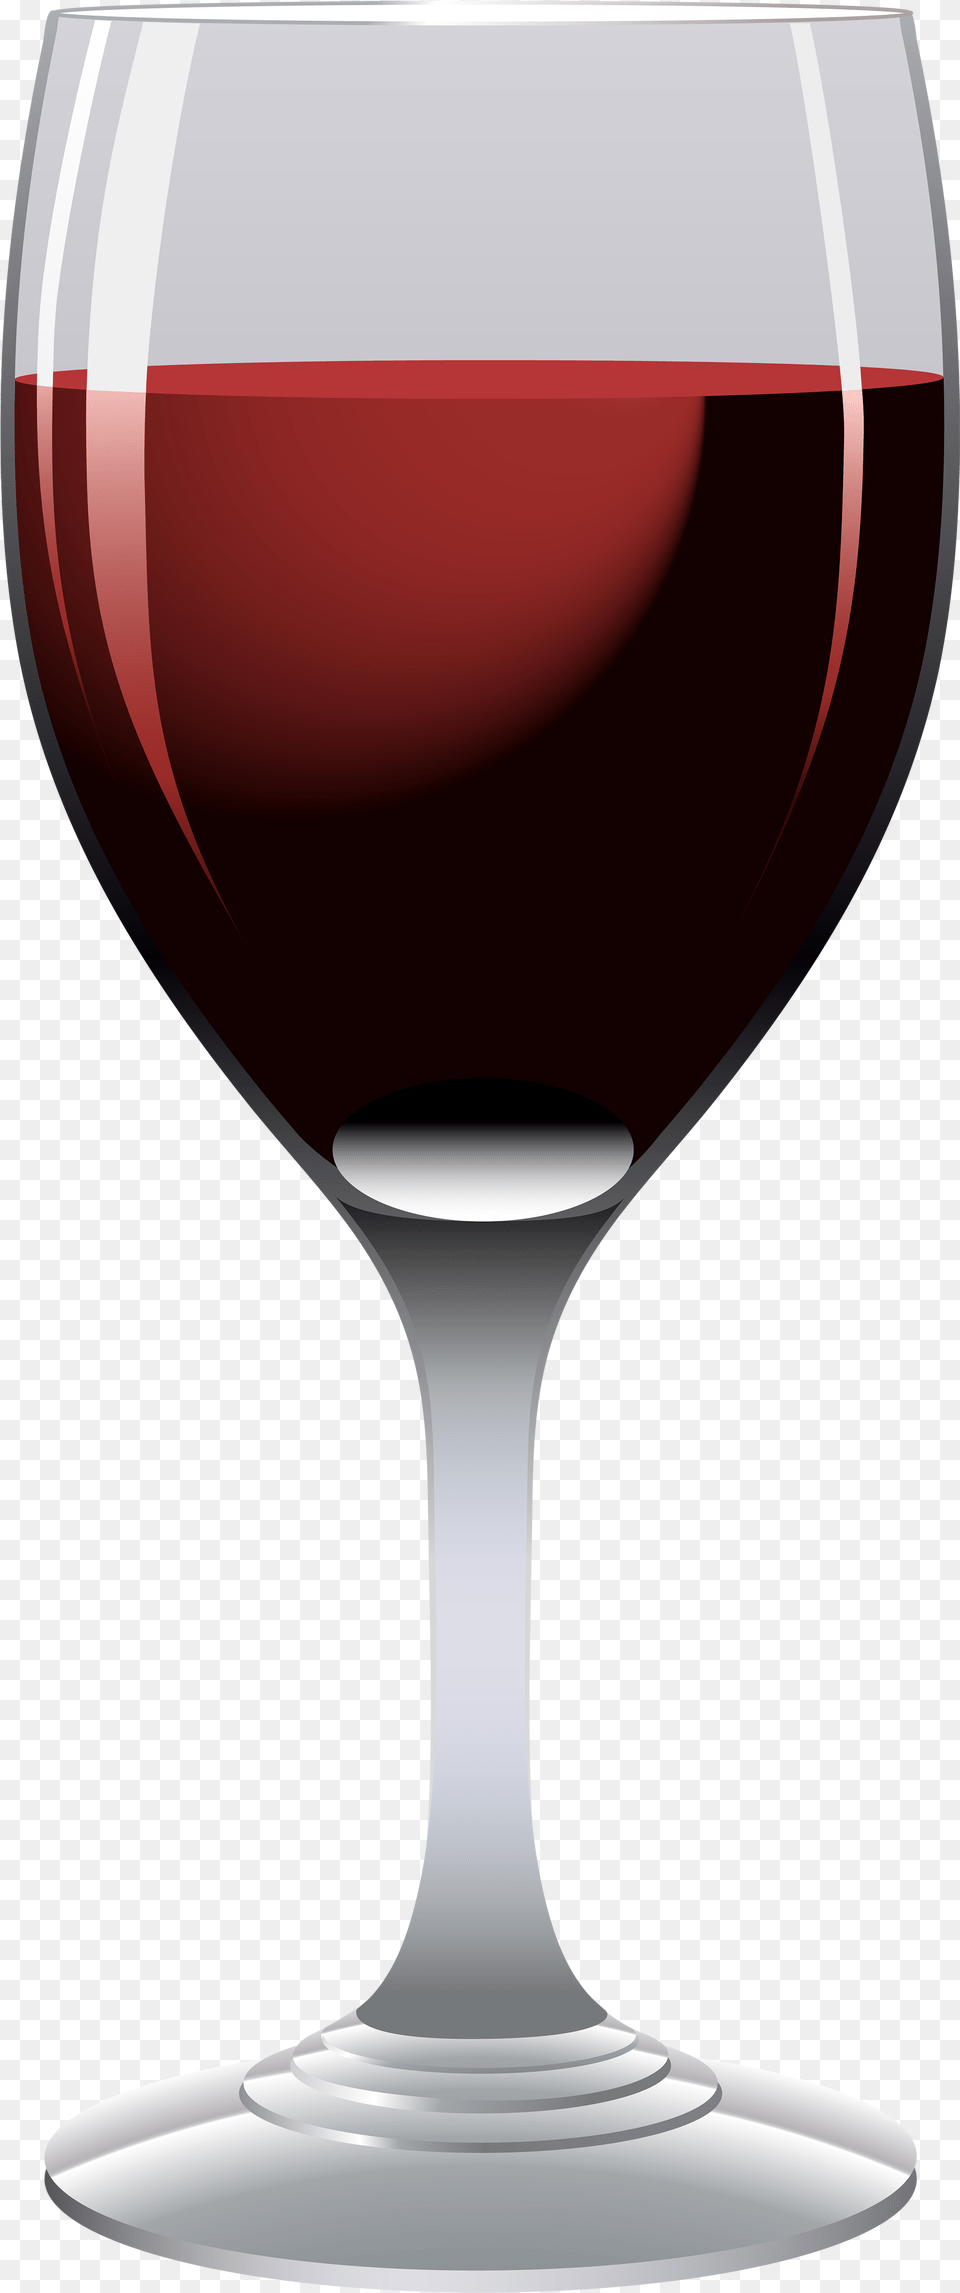 Red Wine Glass Clipart Image Wine Glass Clipart, Alcohol, Beverage, Liquor, Wine Glass Png